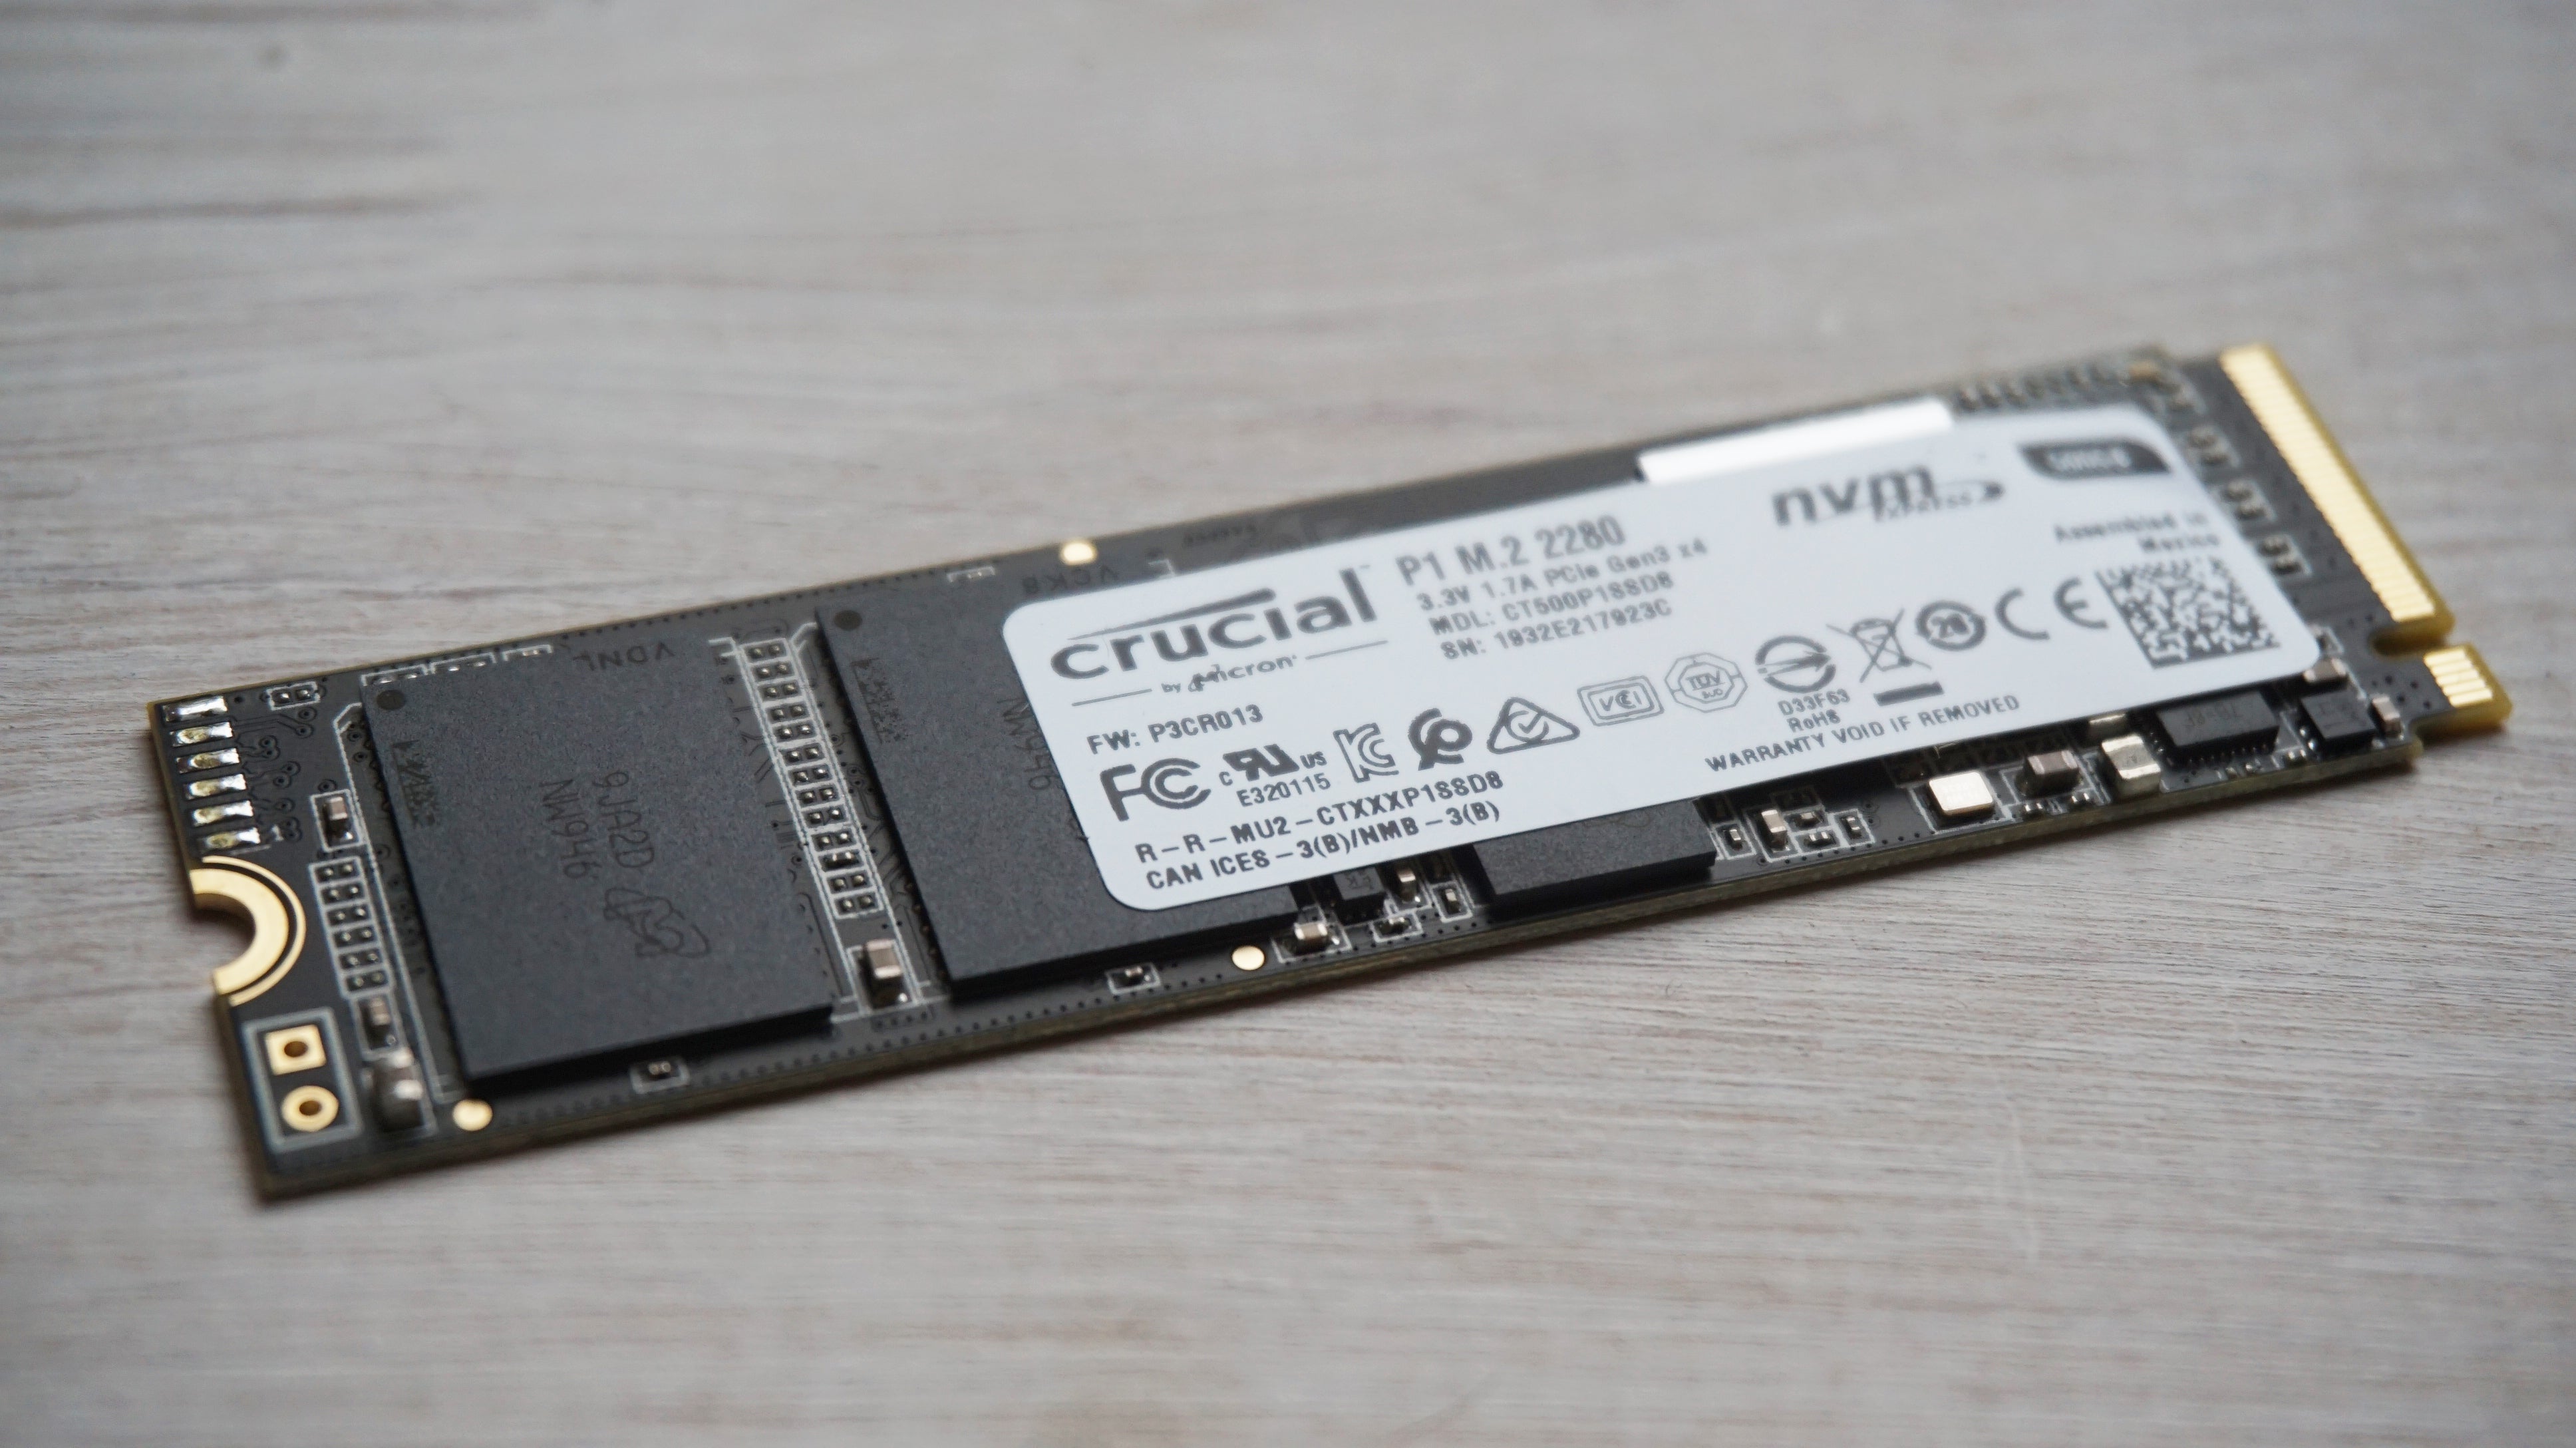 crucial SSD各種　crucial P1 nvme 2280(500G) ADATA SP900(256G) S510(120G)とSSDマウンタ